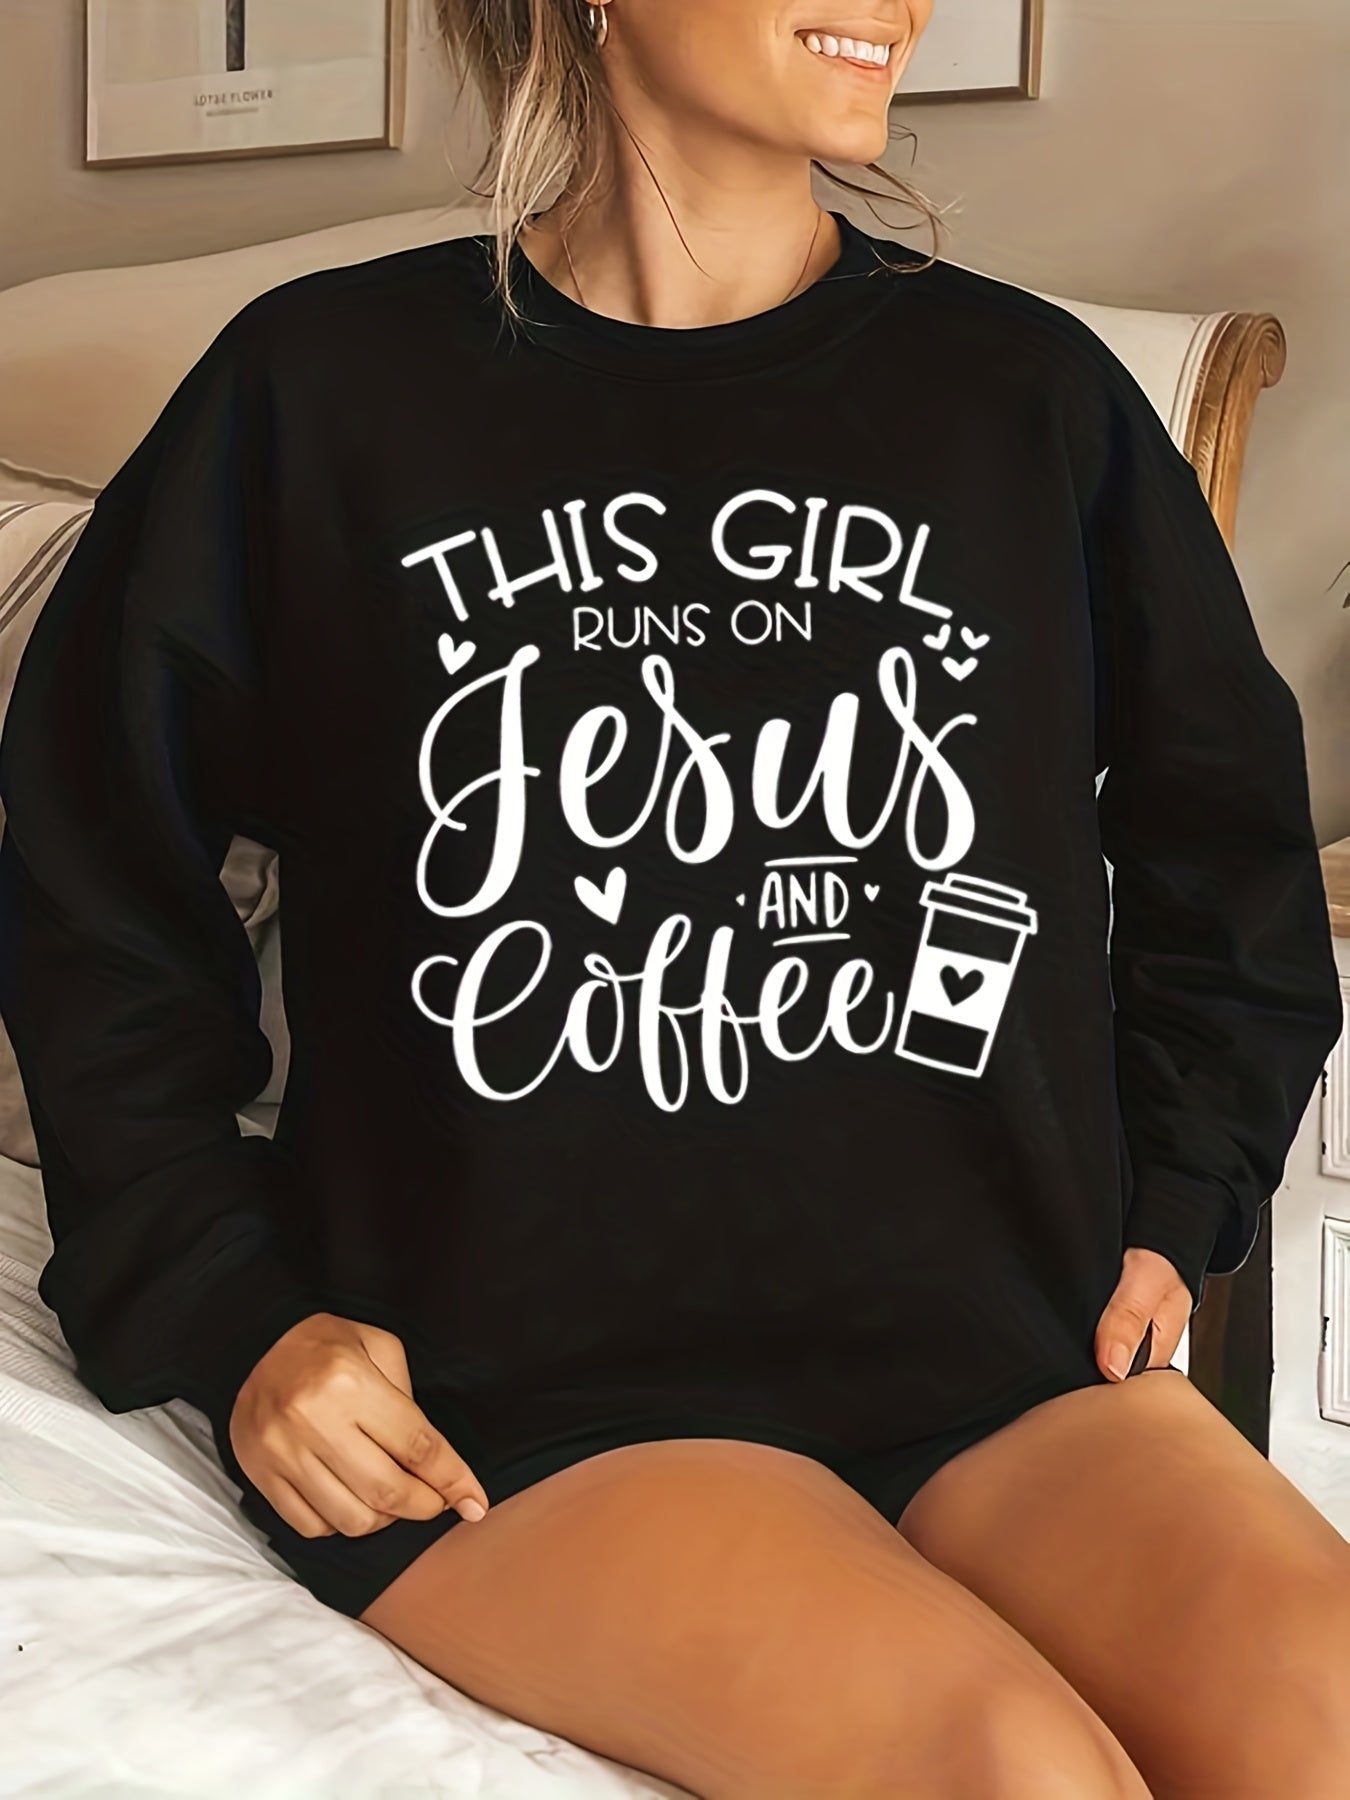 This Girl Runs On Jesus And Coffee Plus Size Women's Pullover Sweatshirt claimedbygoddesigns